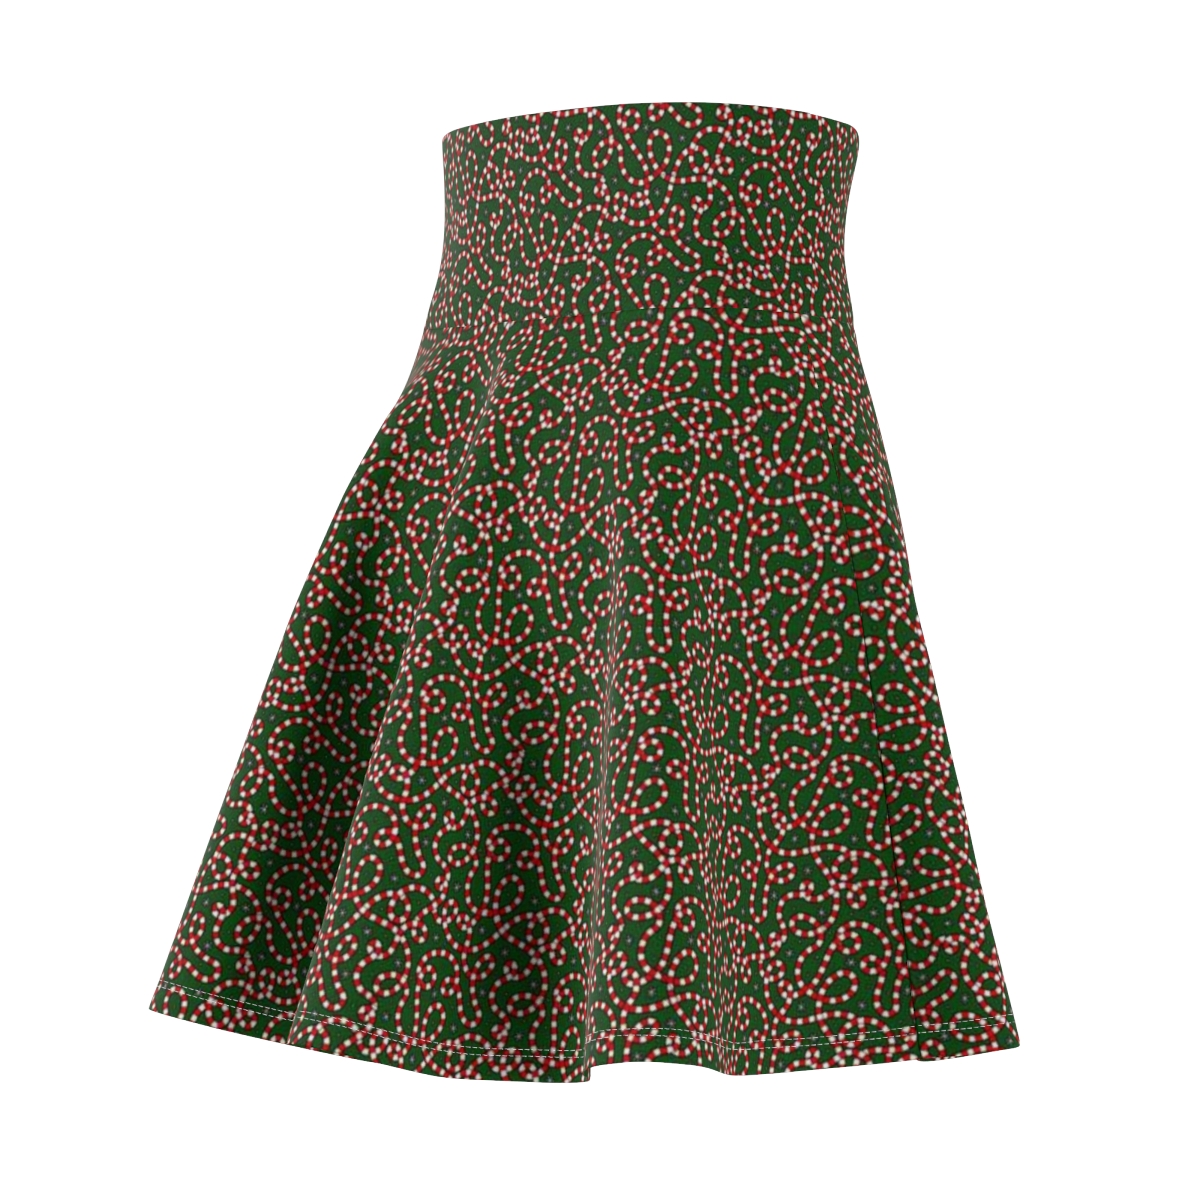 Grinchy Candy Canes Women's Skater Skirt (green) product thumbnail image